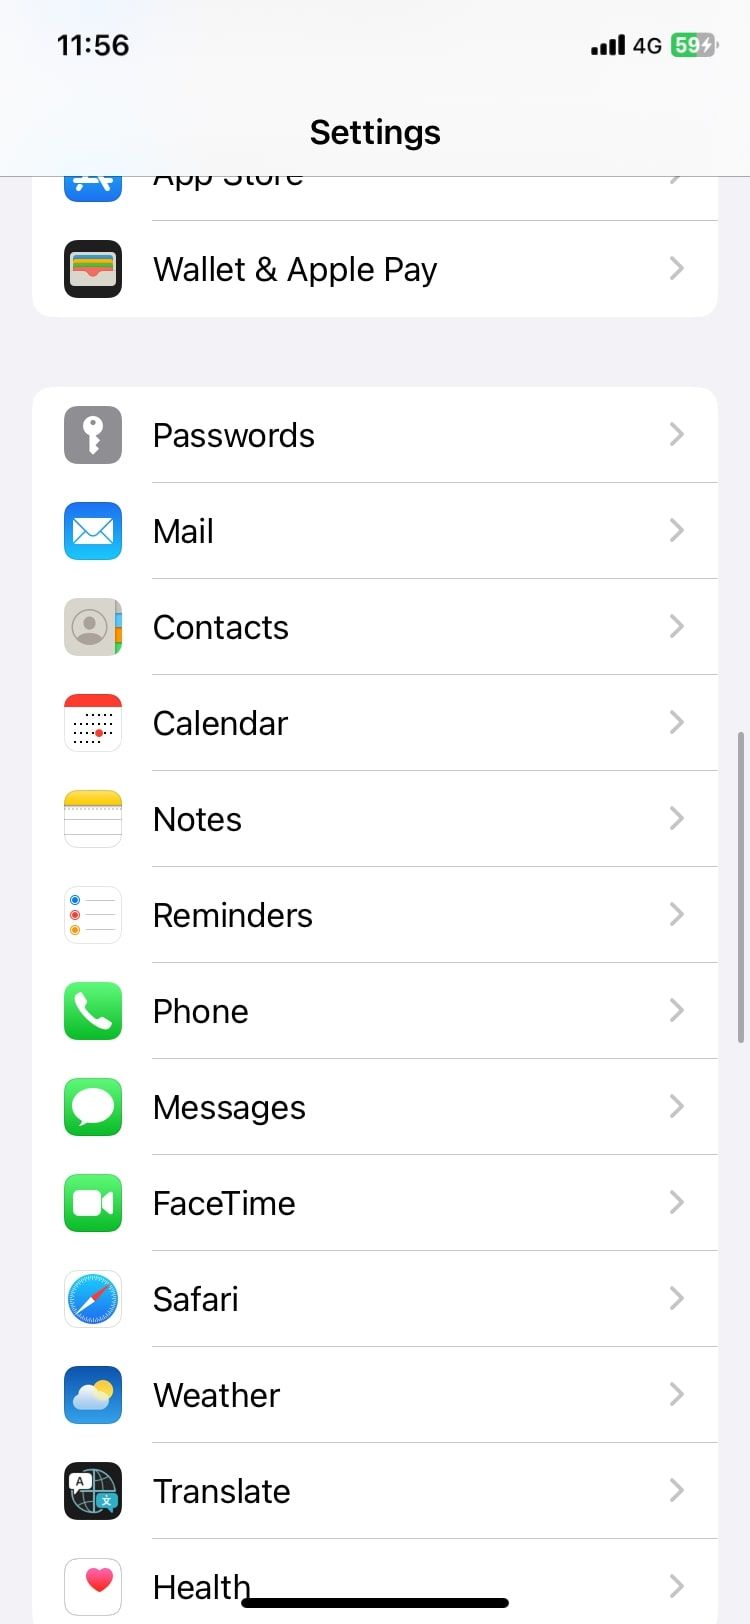 mail in iPhone settings